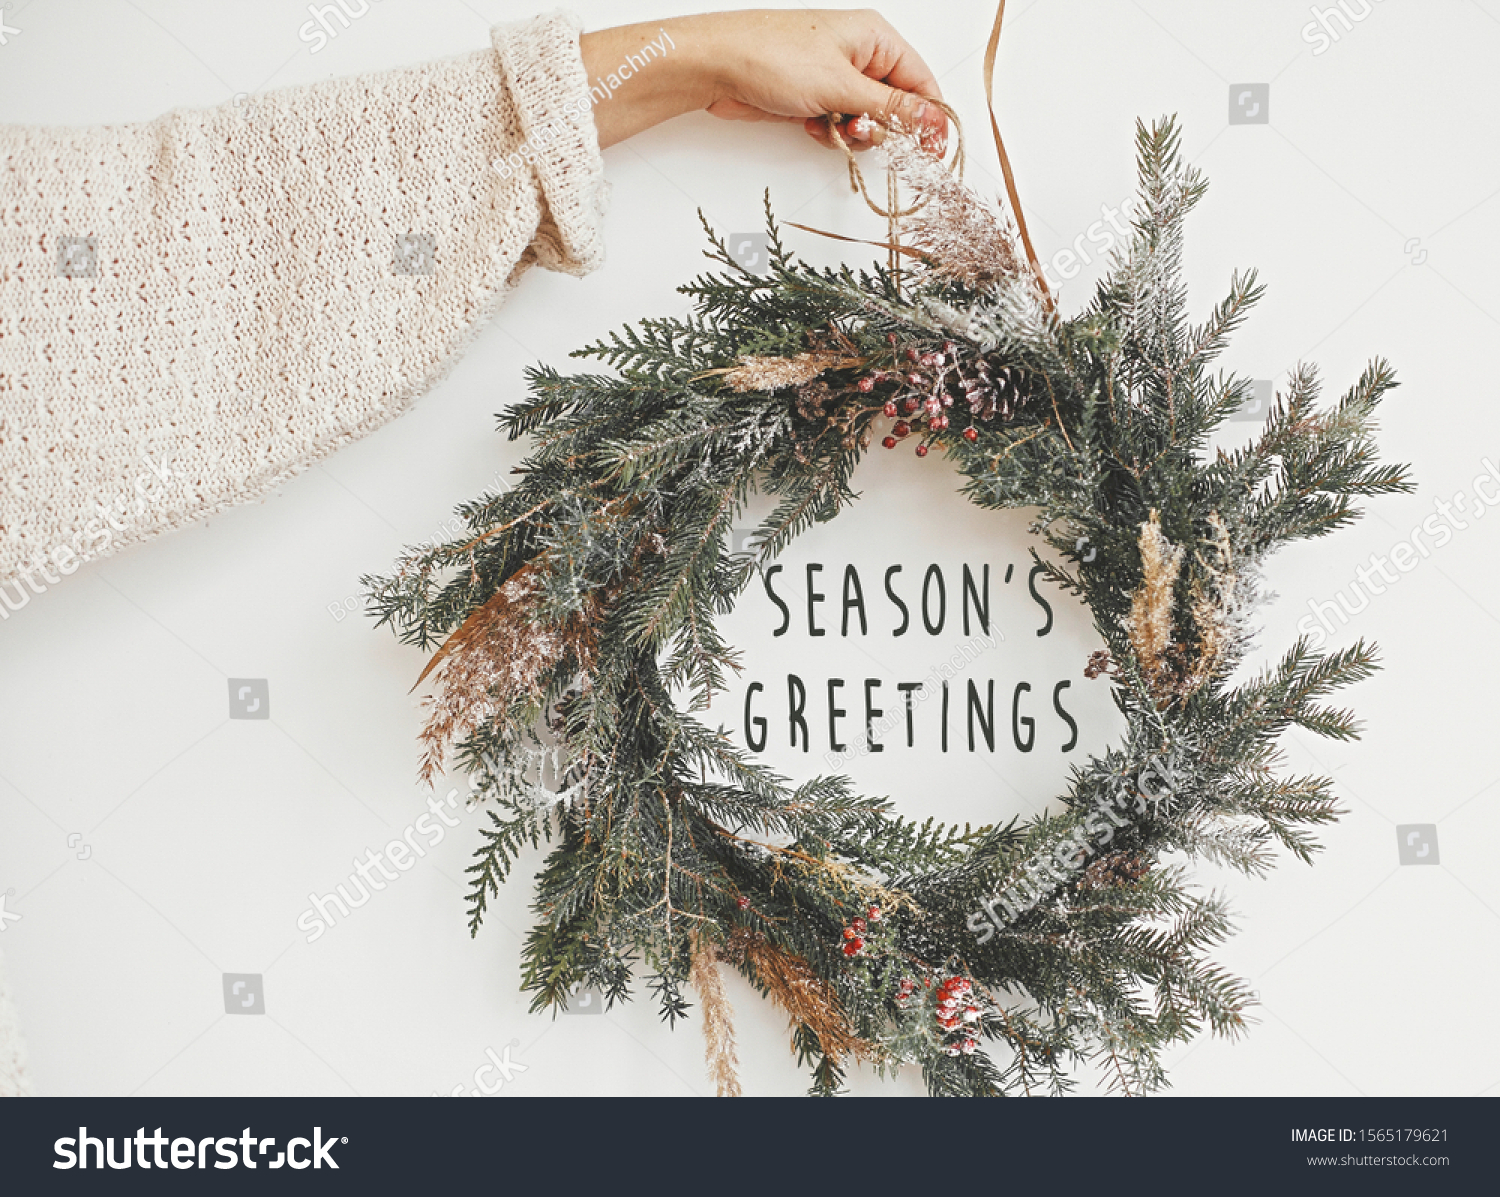 Season's greetings text sign on christmas rustic wreath in girl hand. Creative rural  wreath with fir branches, berries, pine cones, herbs hanging on white wall in room. Seasons greeting card #1565179621